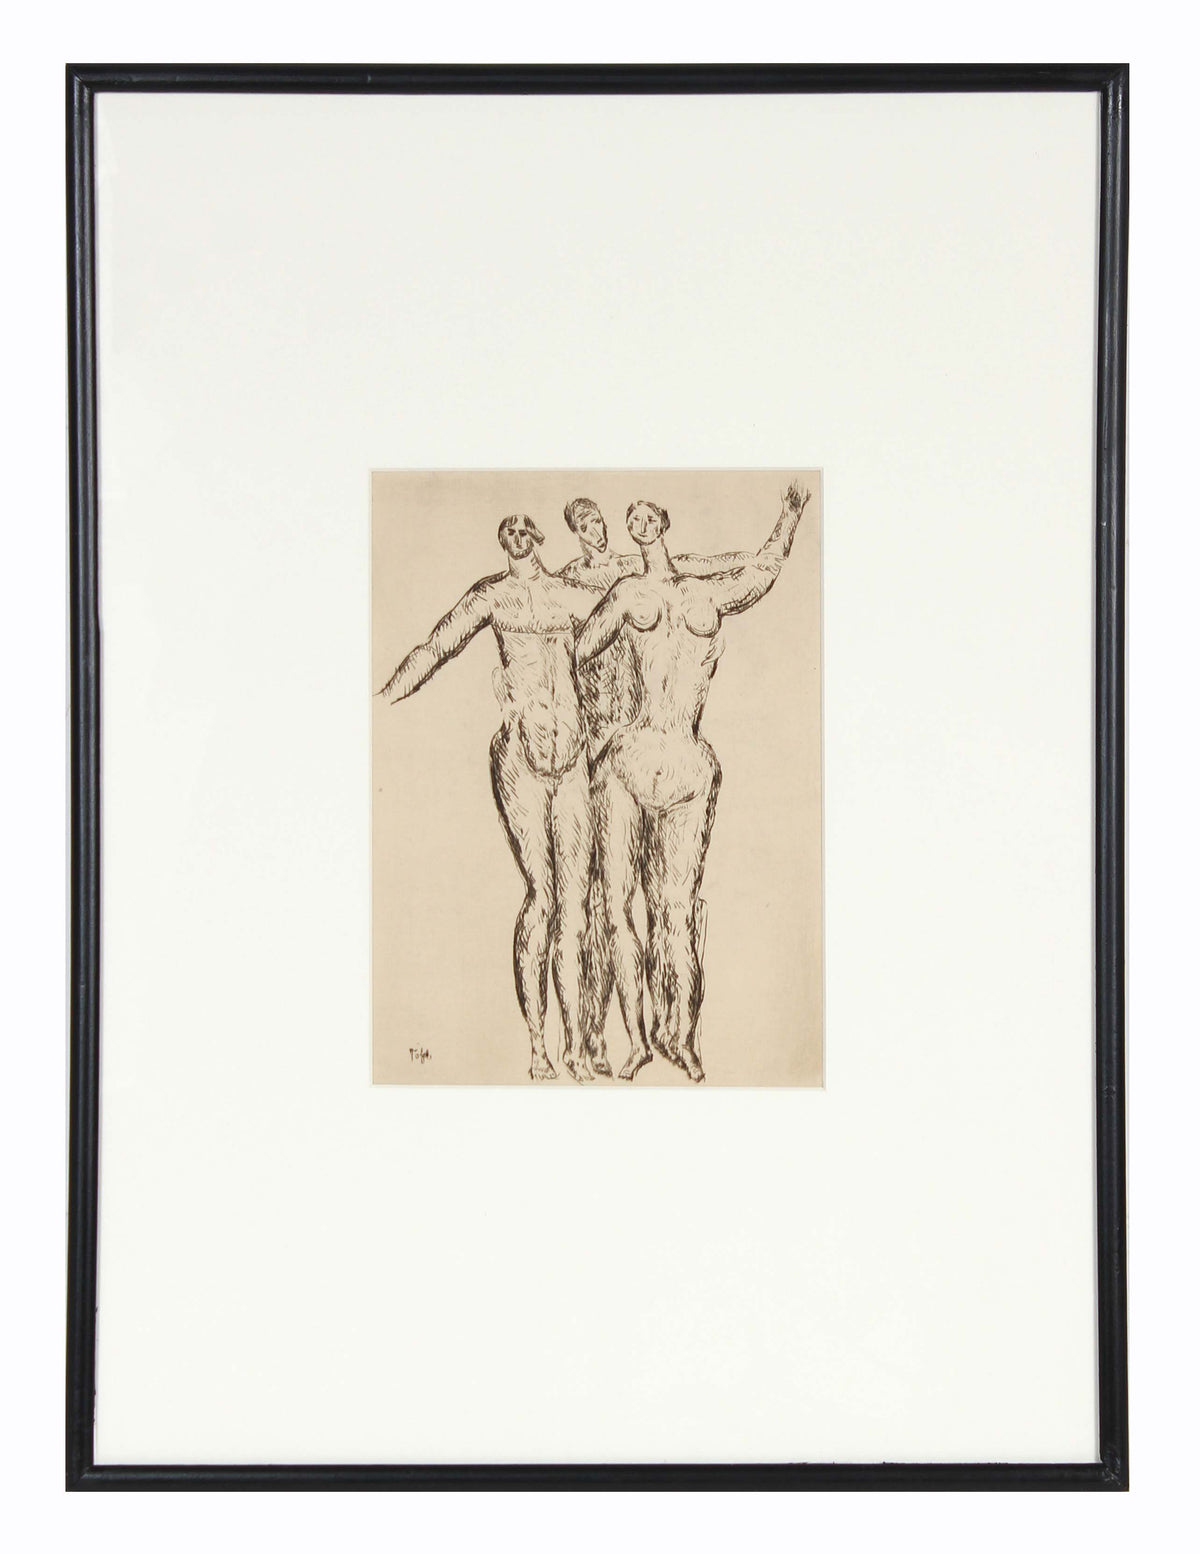 Three Embracing Expressionist Figures&lt;br&gt;Early 20th Century Etching&lt;br&gt;&lt;br&gt;#11256